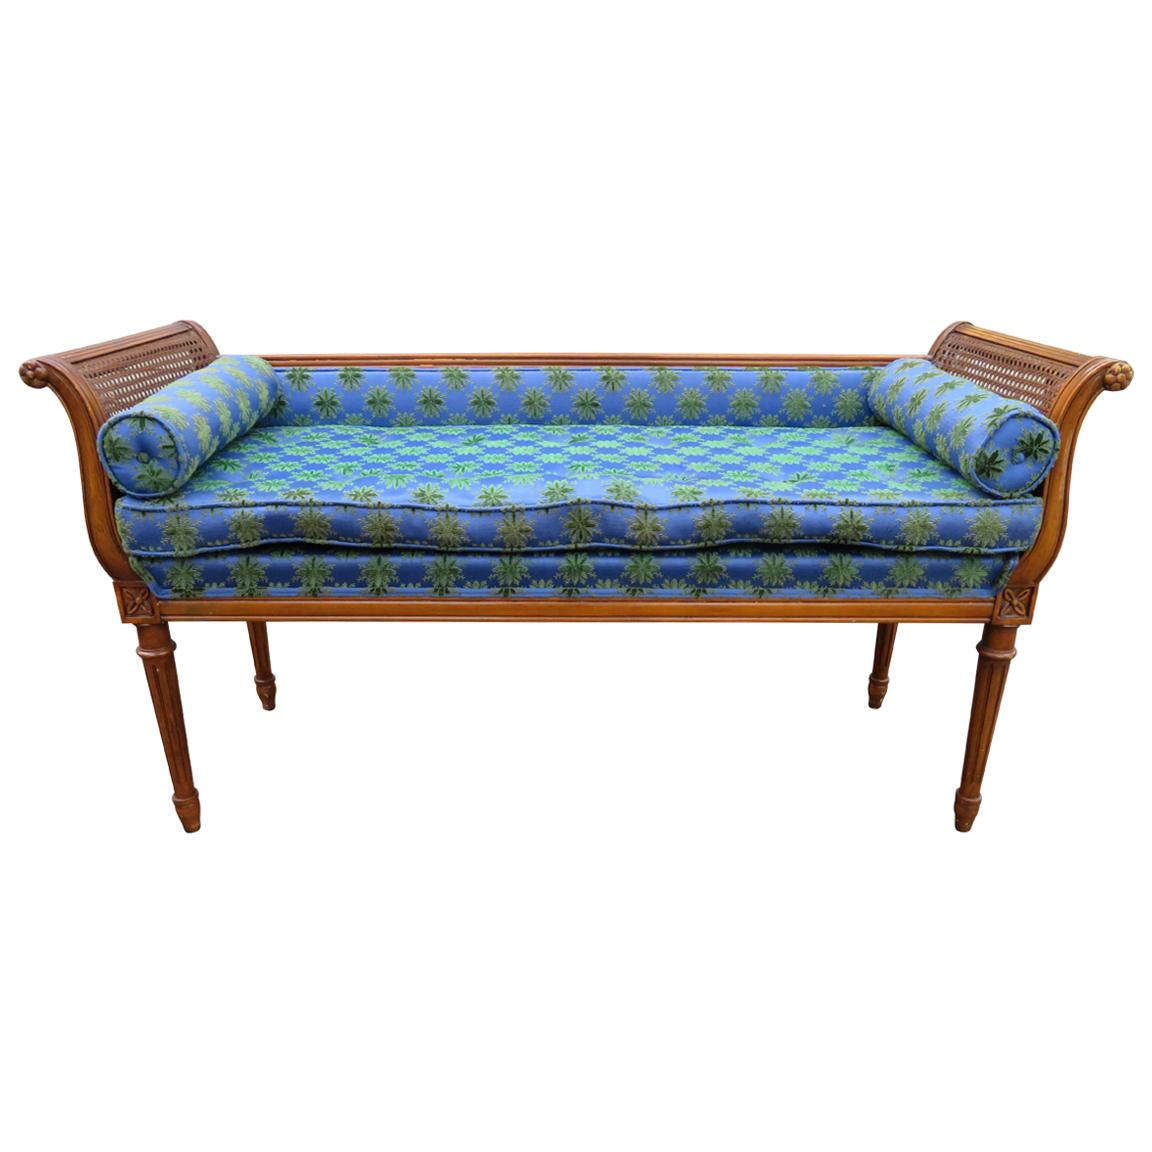 Wonderful Hollywood Regency Neoclassical Style Cane Arm Upholstered Bench